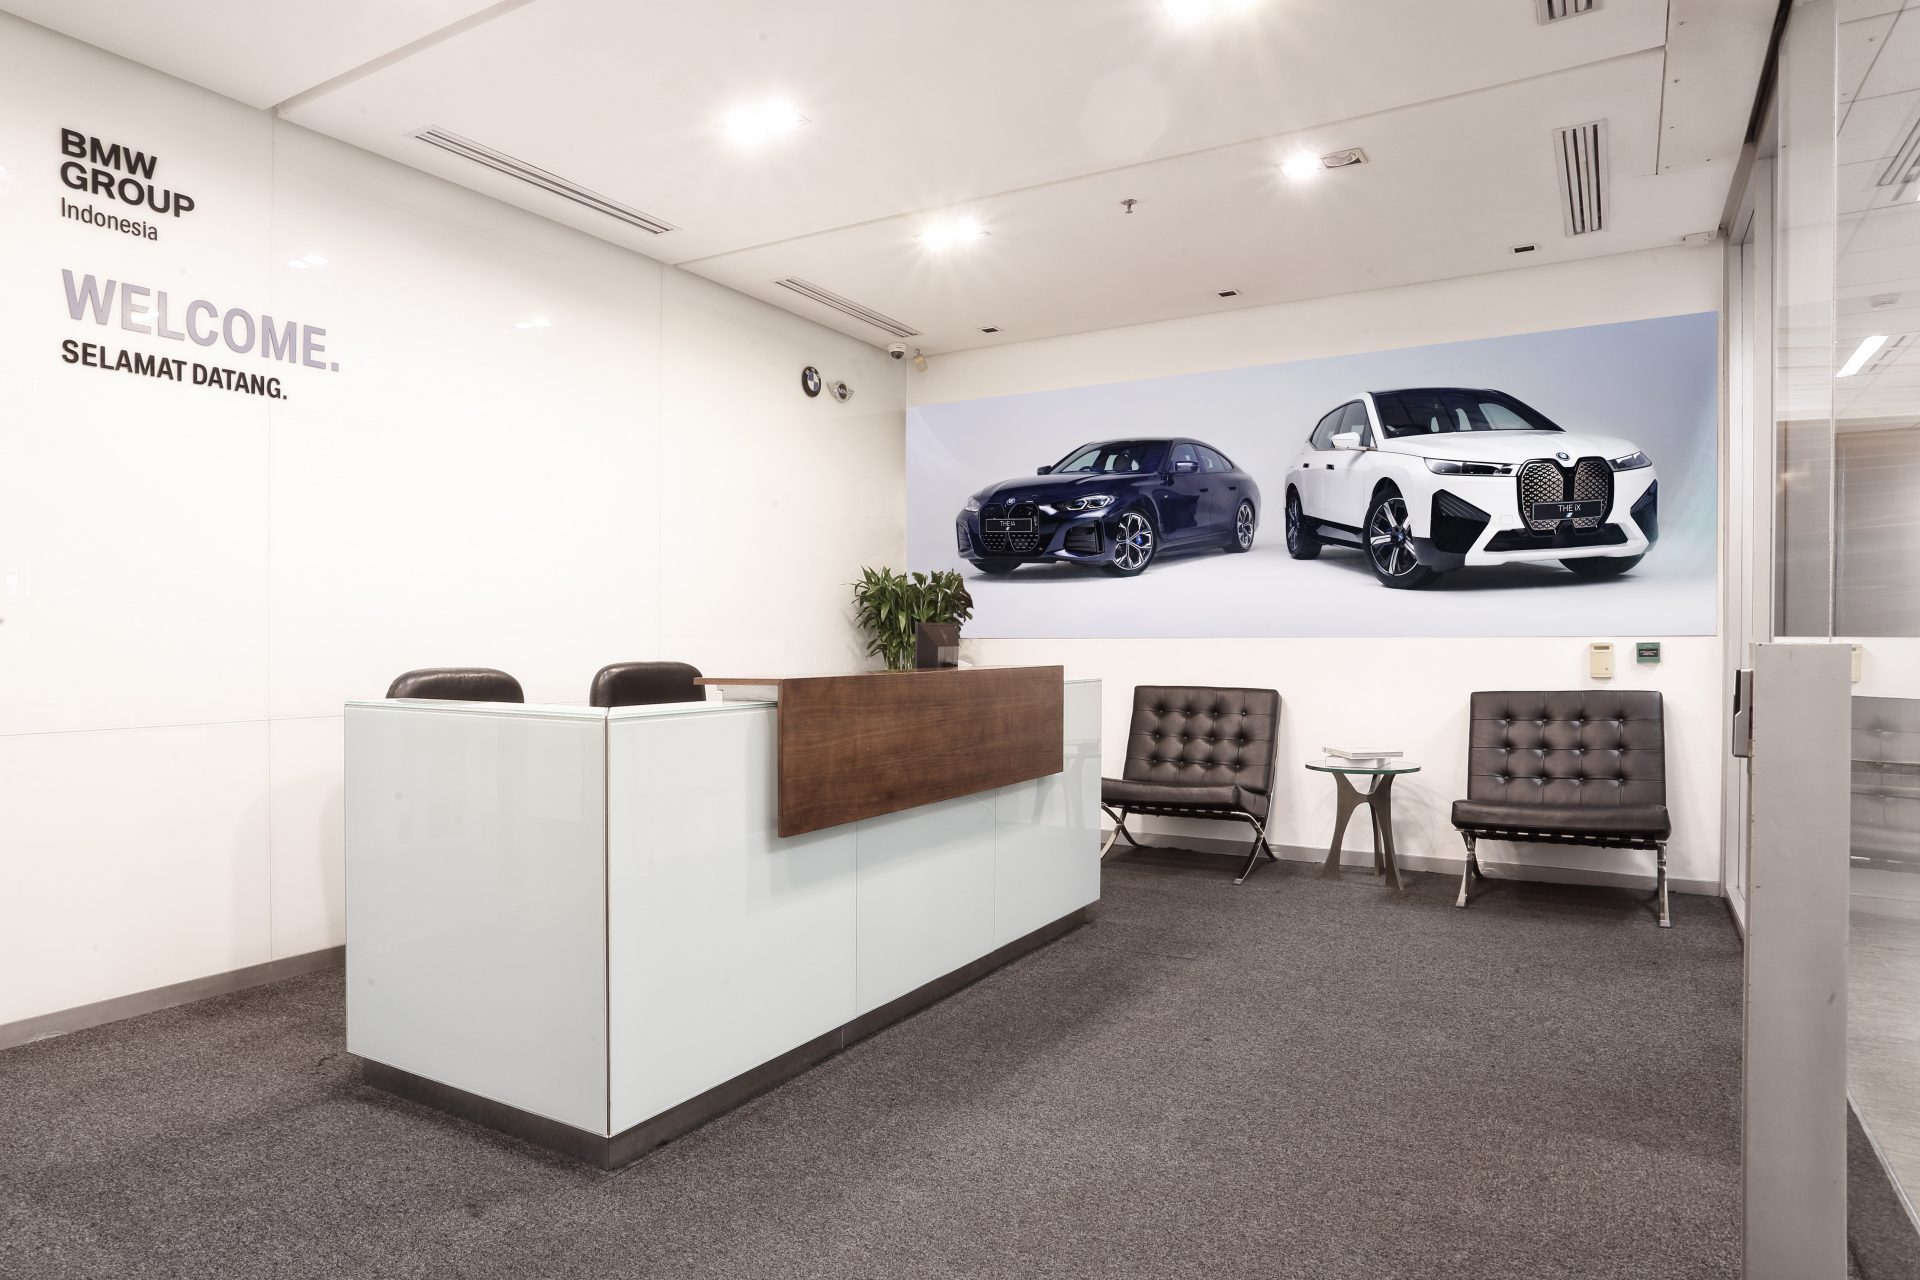 This picture shows the entrance area of BMW Group Indonesia.